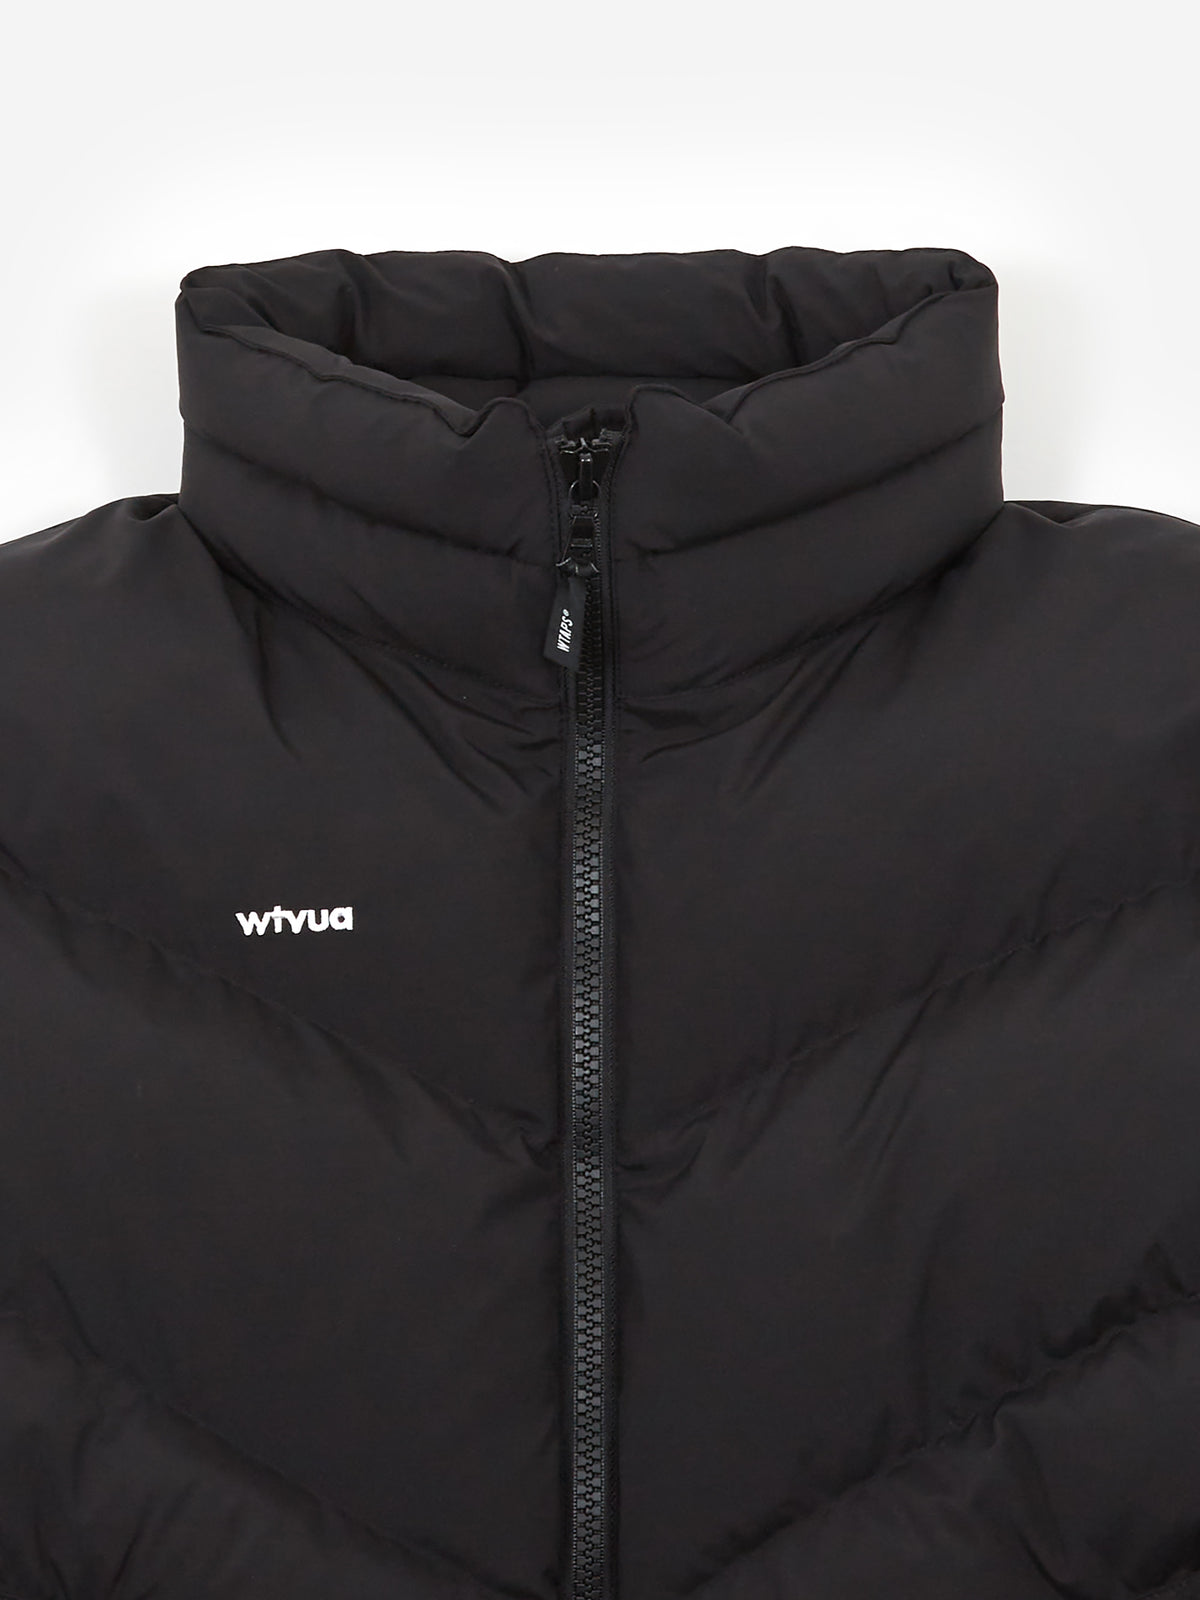 Shop online for the latest WTAPS TTL / Jacket / Poly. Taffeta